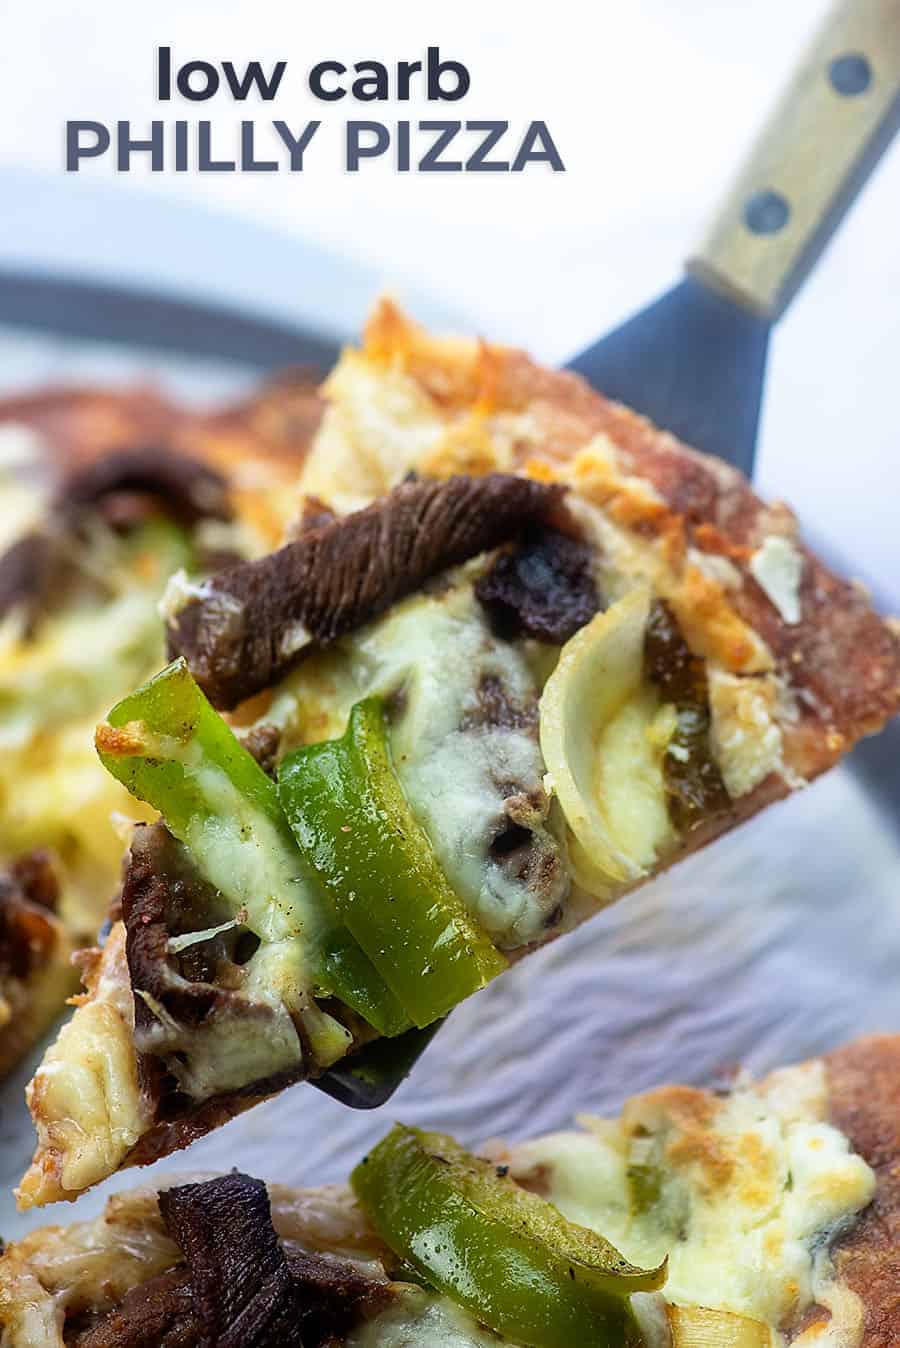 A single slice of cheesesteak pizza being held up to the camera.